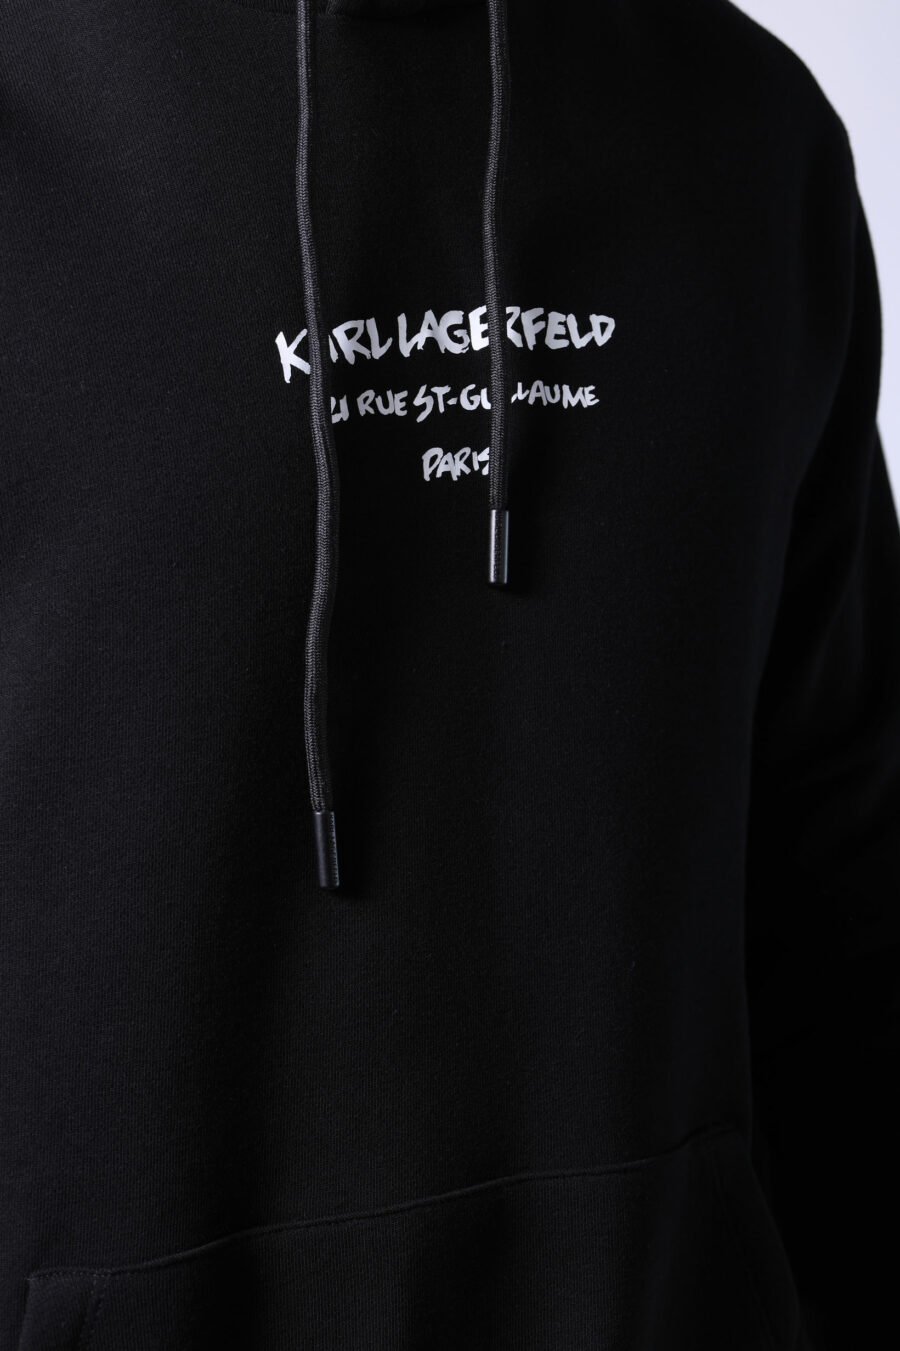 Black hooded sweatshirt with logo "rue st guillaume" - Untitled Catalog 05749